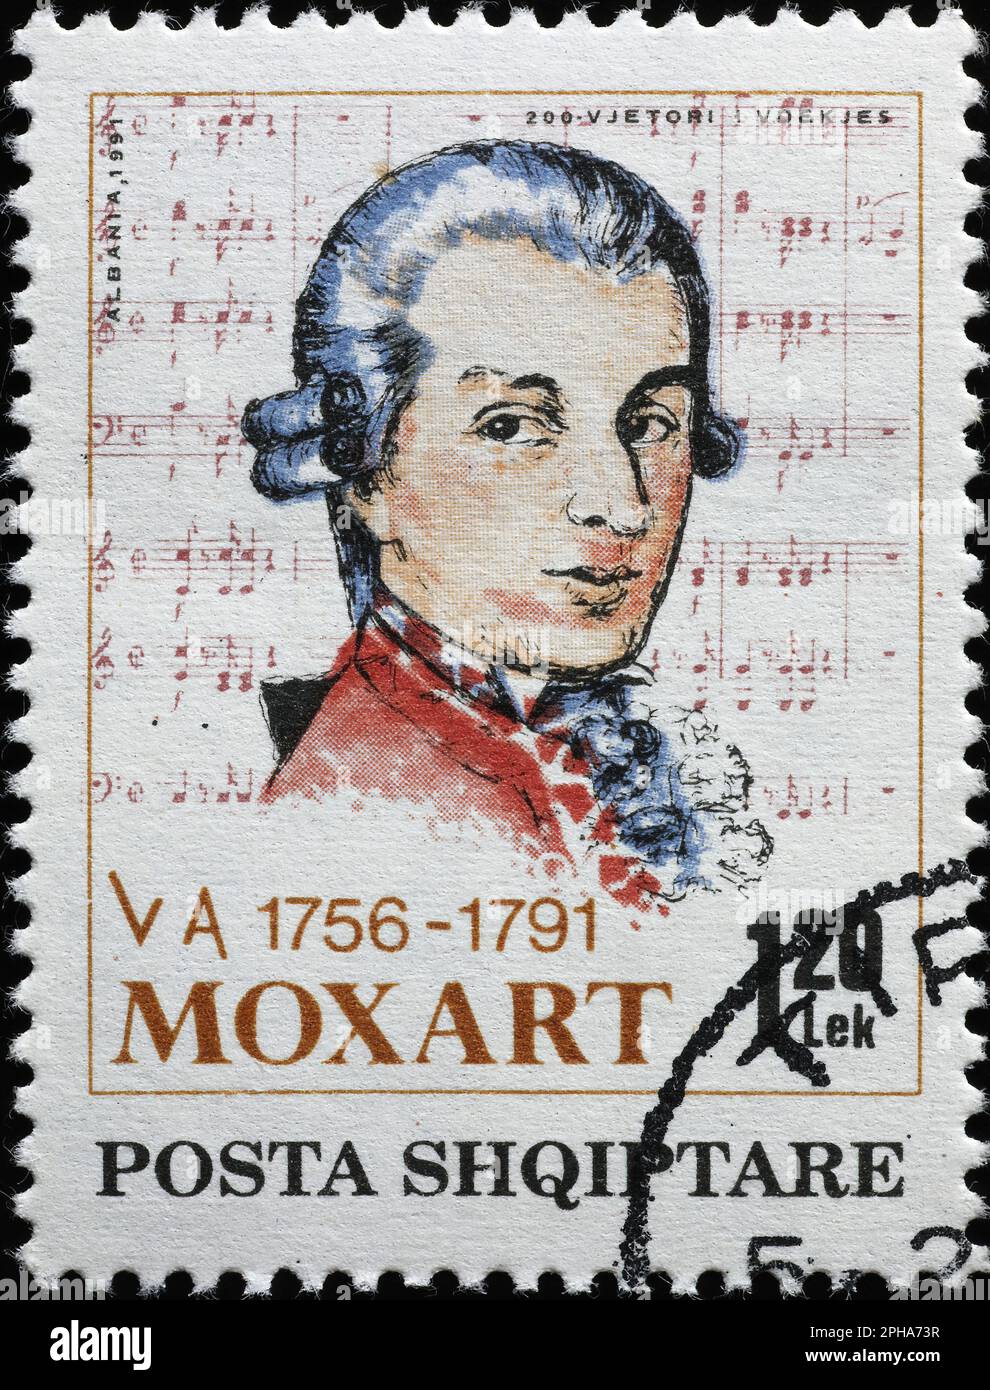 Portrait of Mozart on postage stamp from Albania Stock Photo